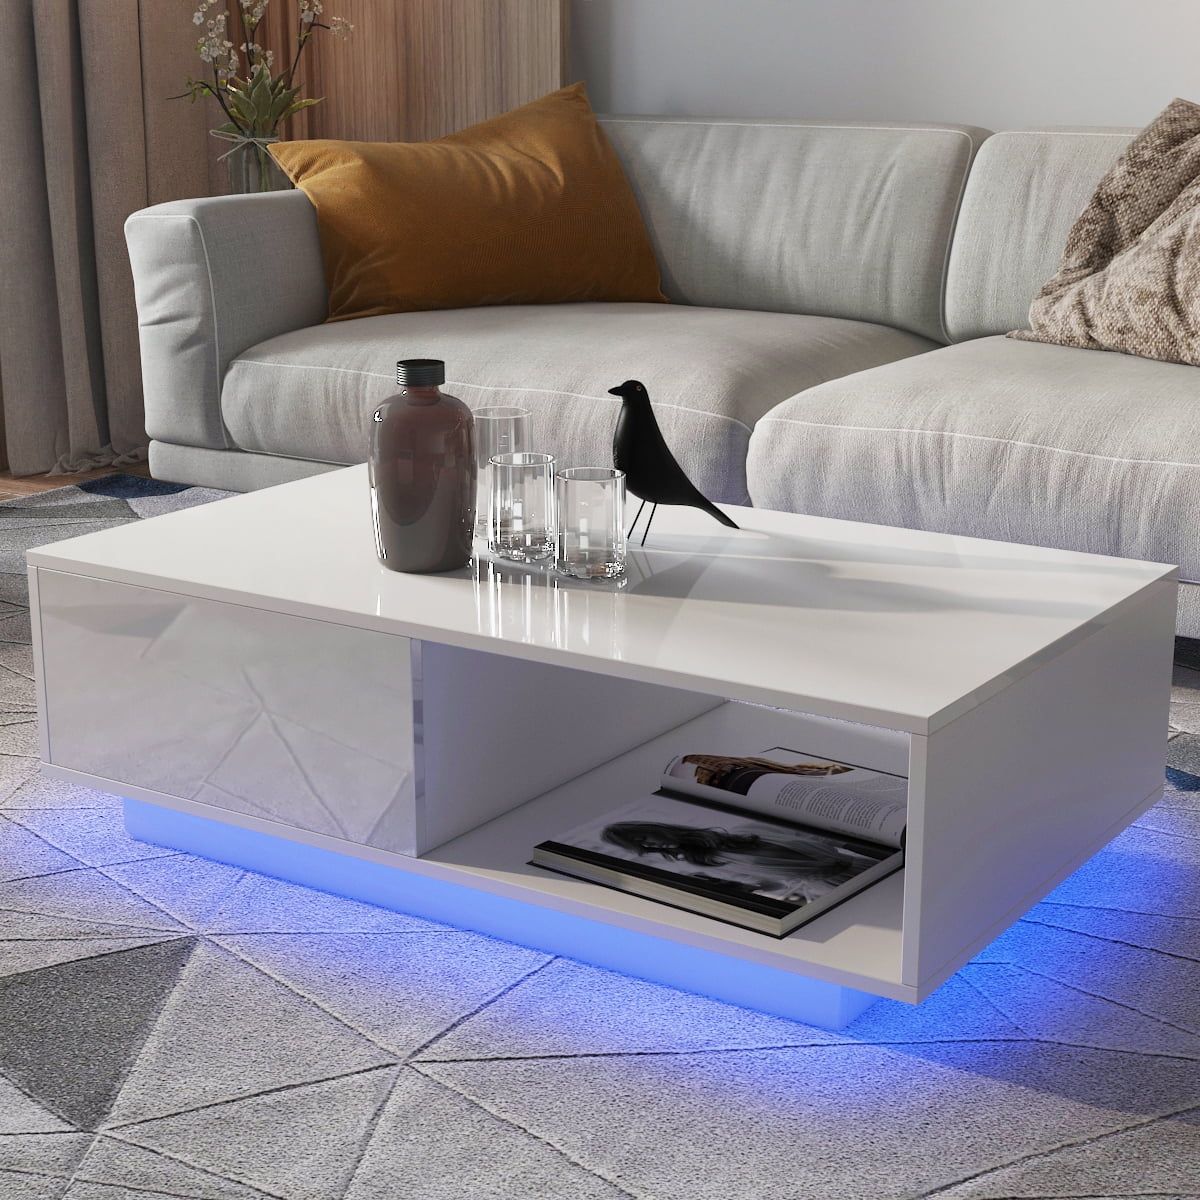 Led Coffee Table With Spacious Lower Shelf & 2 Drawers, Modern Sofa Intended For Rectangular Led Coffee Tables (Photo 14 of 15)